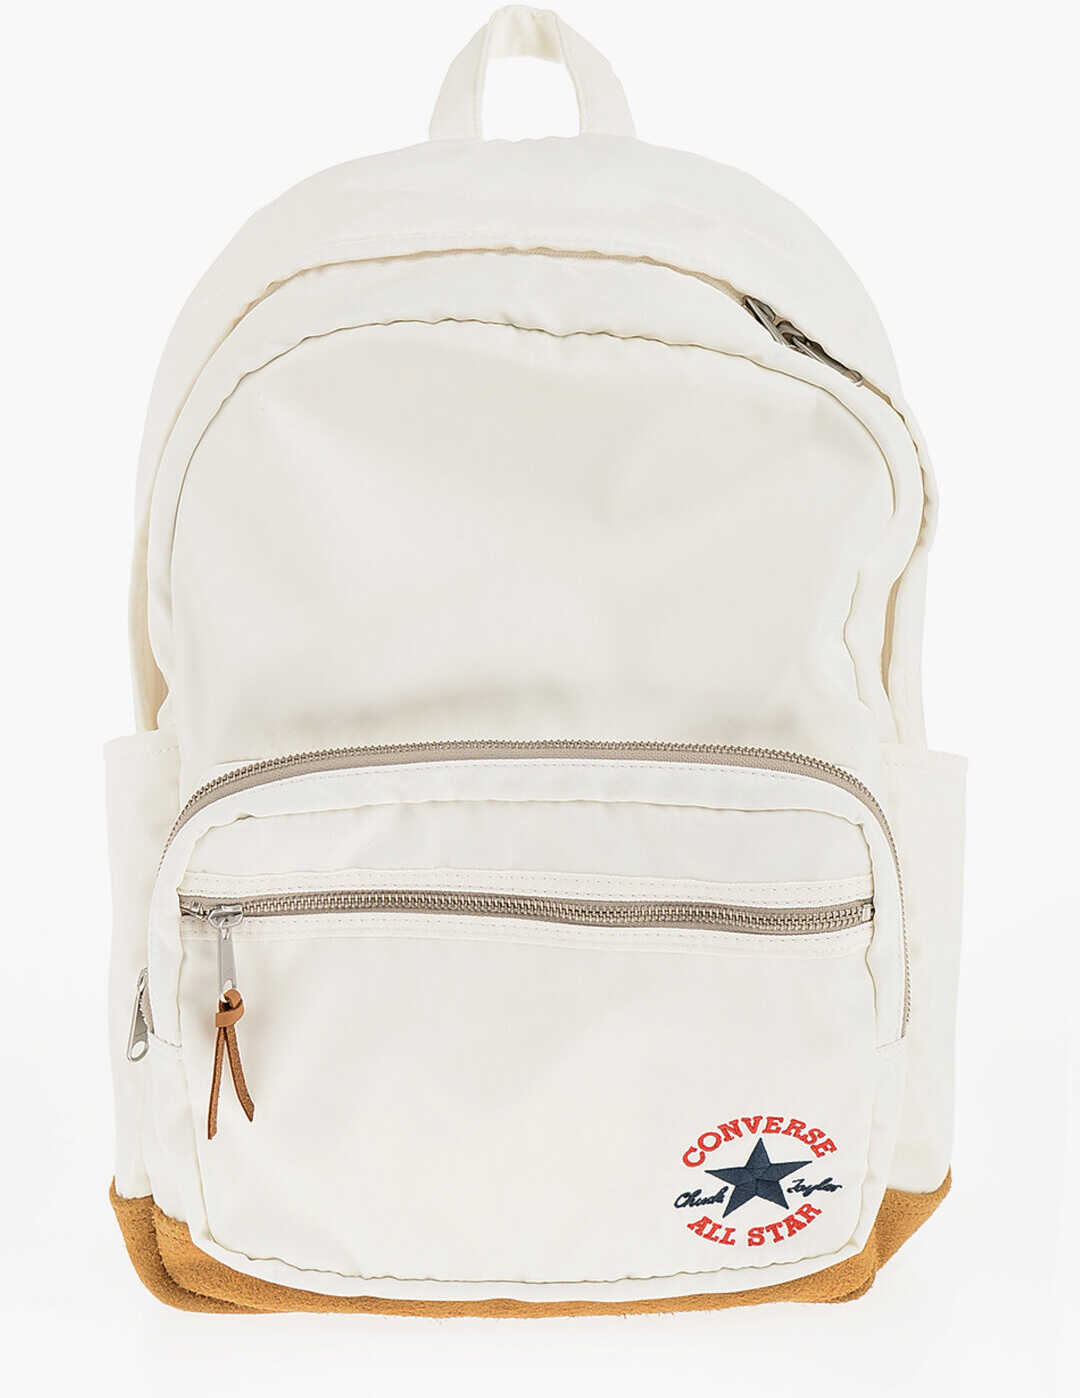 Converse All Star Chuck Taylor Multi-Pocket Retro Go 2 Backpack With White